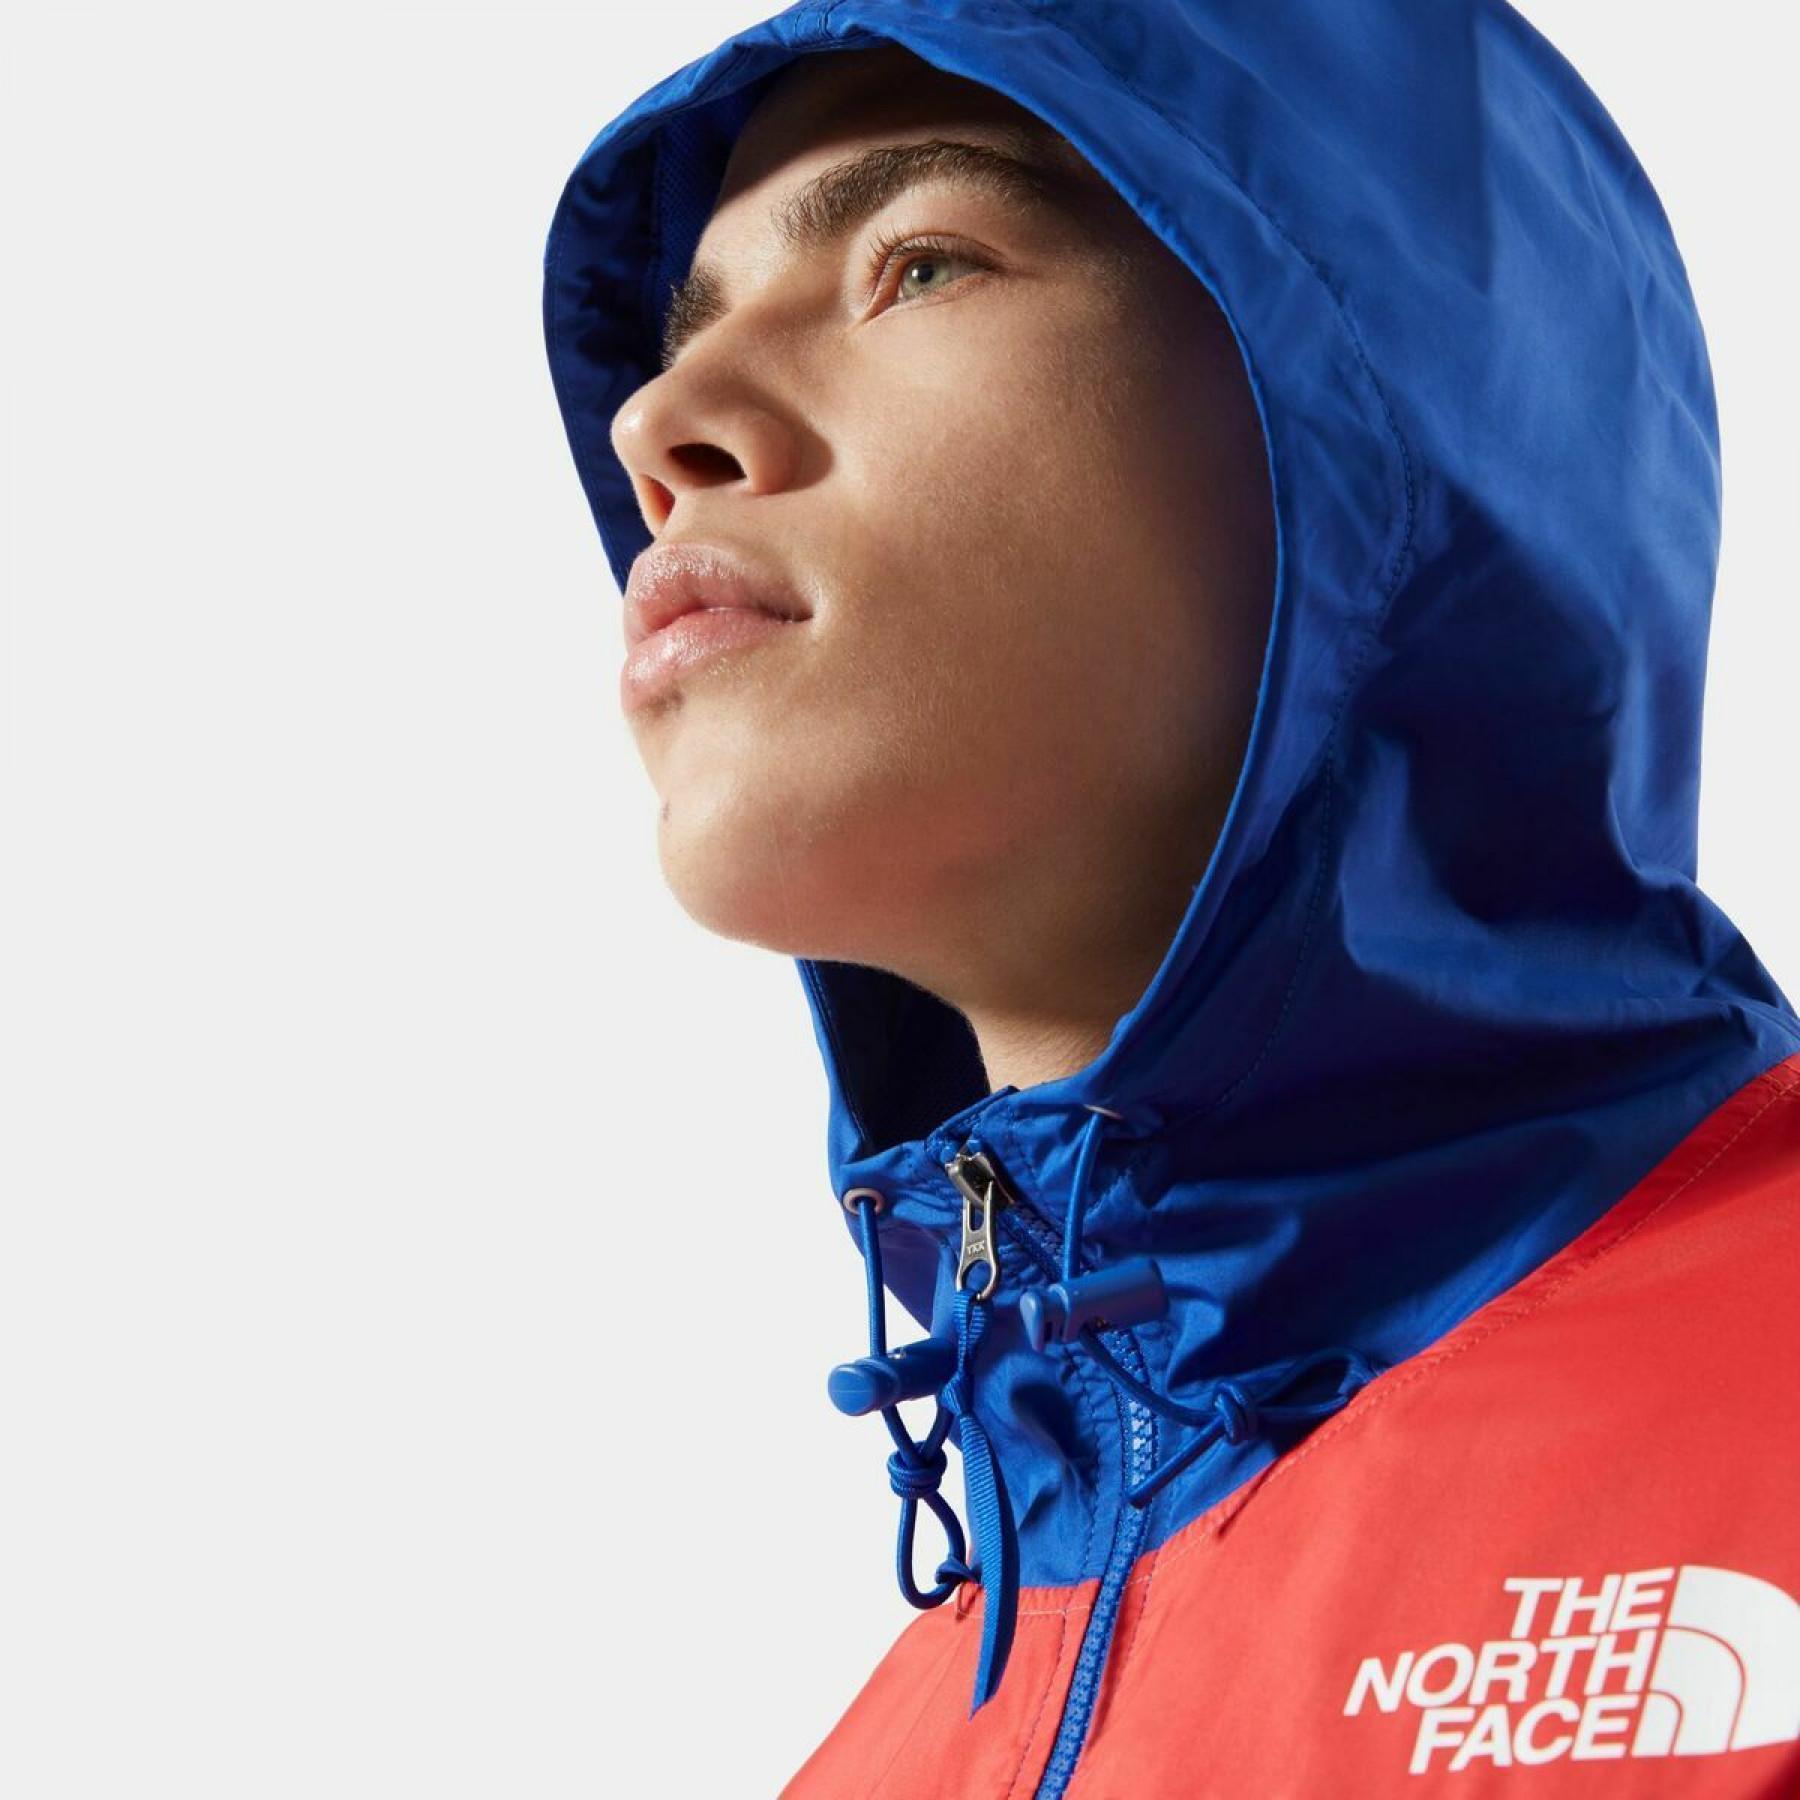 Jaqueta The North Face Hydrenaline